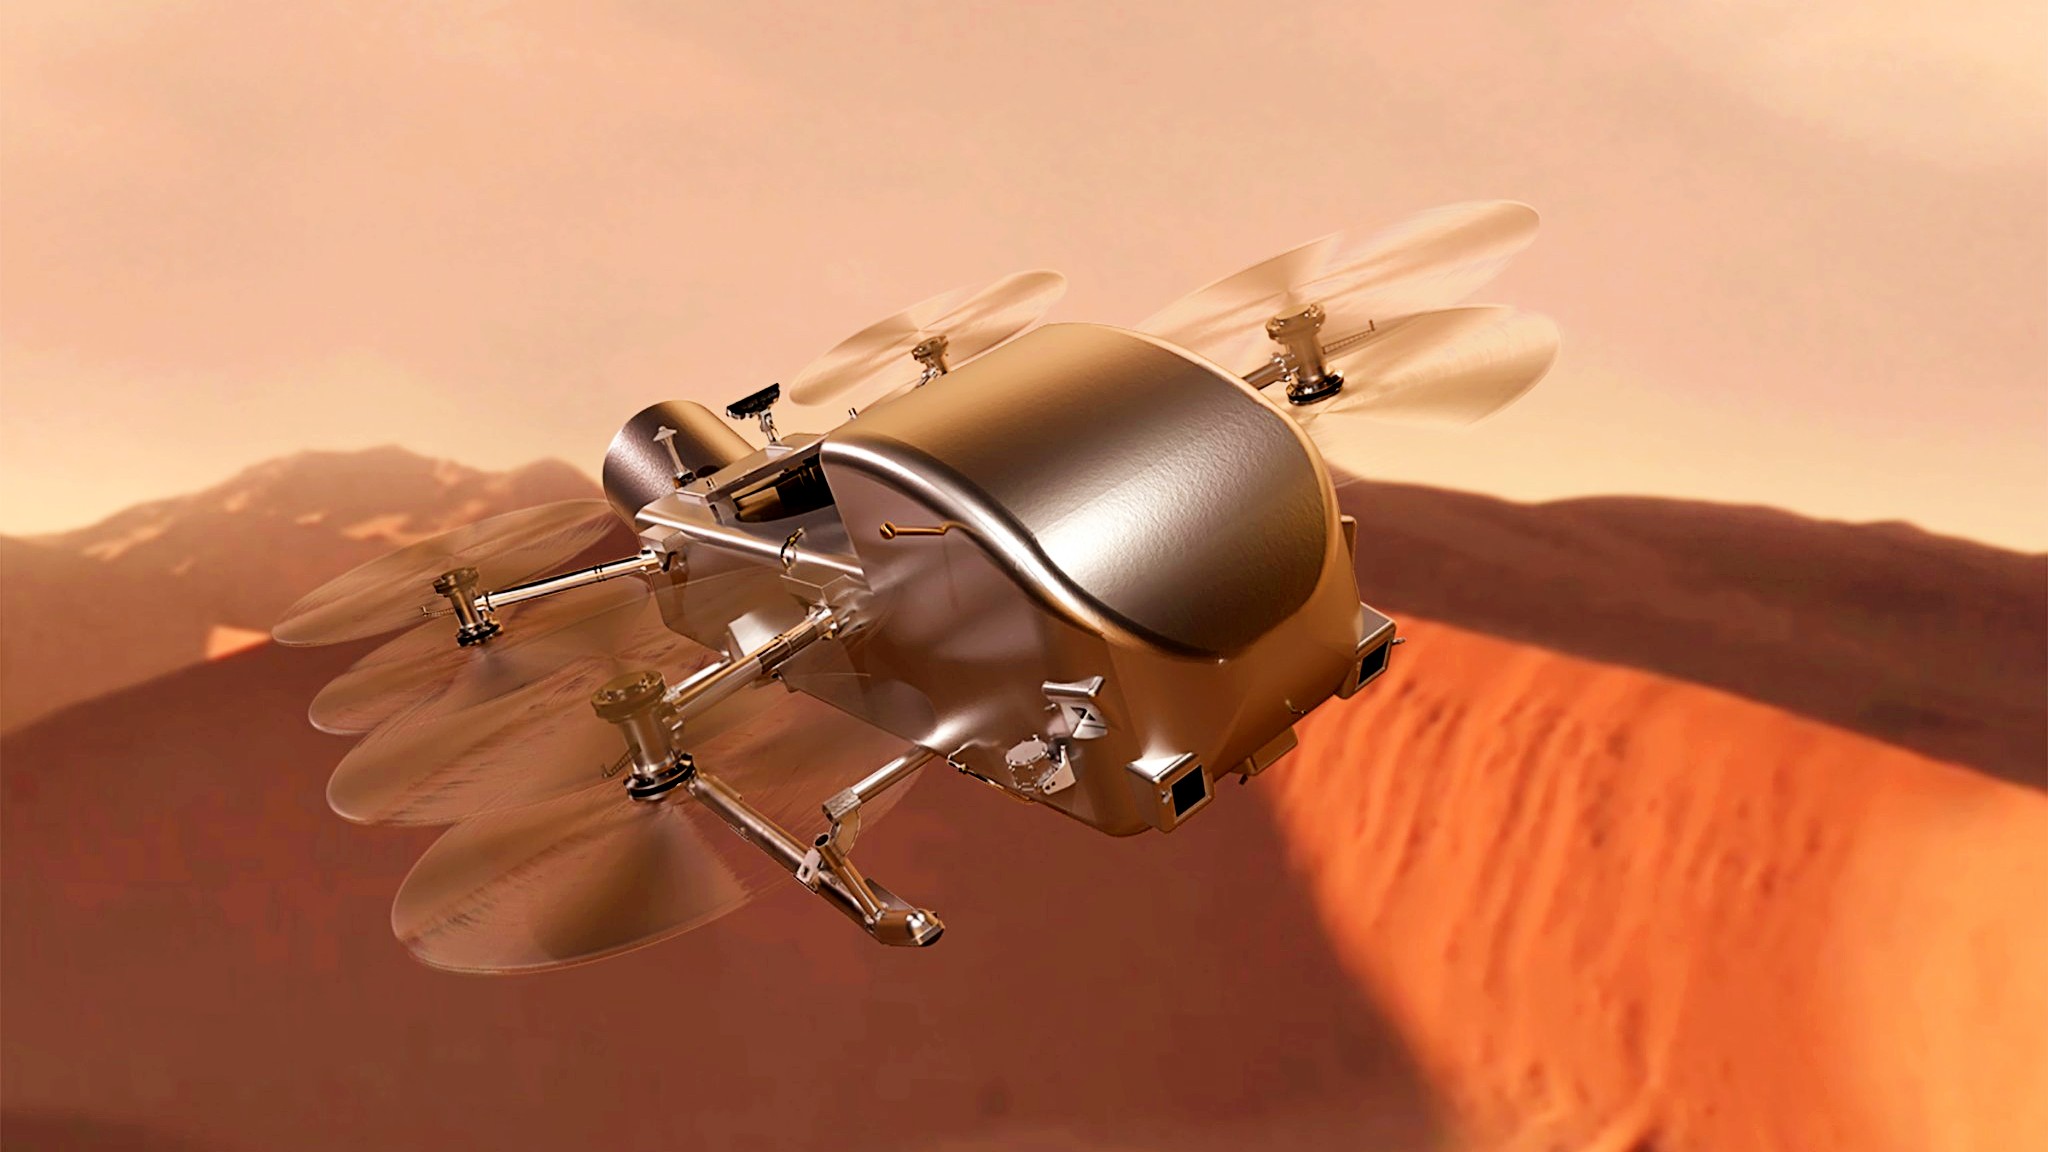 Illustration of a drone exploring over a dusty, red martian landscape with mountains in the background.